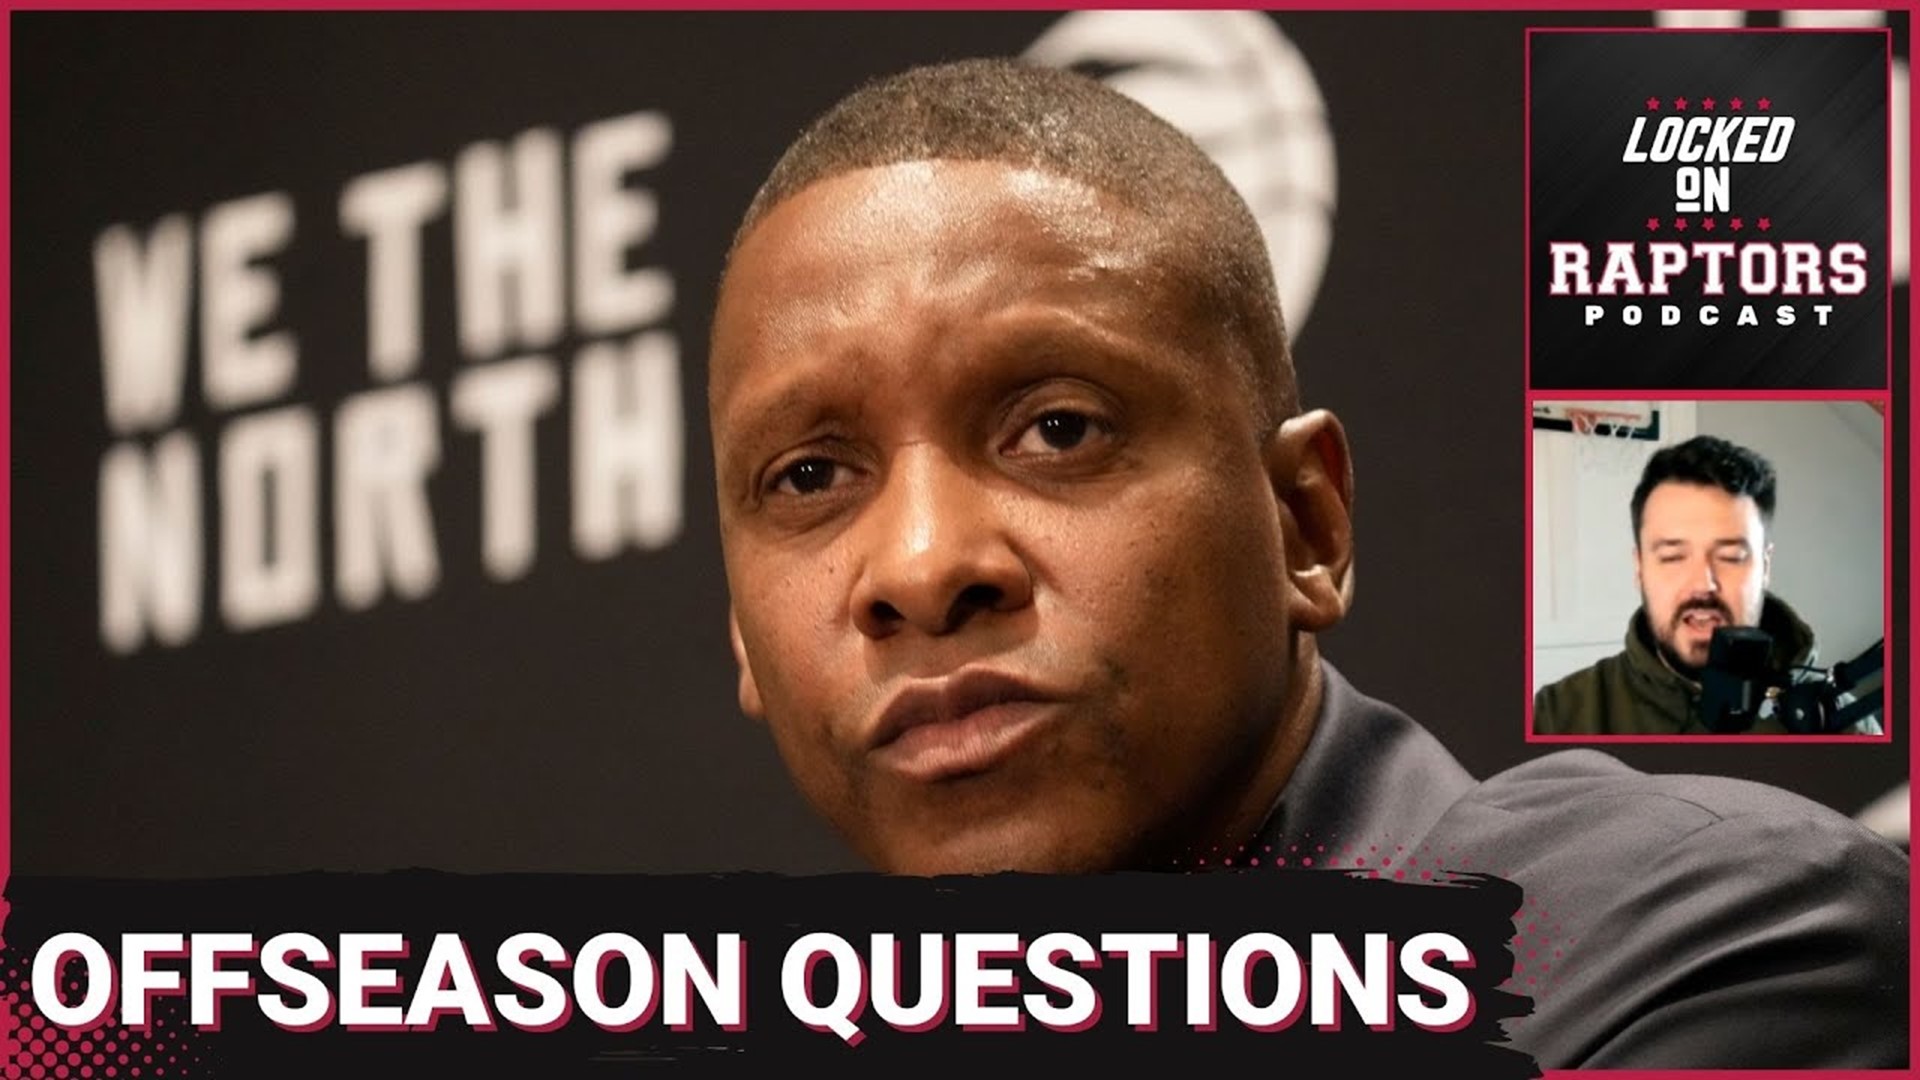 In Episode 1616, Sean Woodley goes solo to run down the three biggest offseason questions facing the Toronto Raptors and their front office